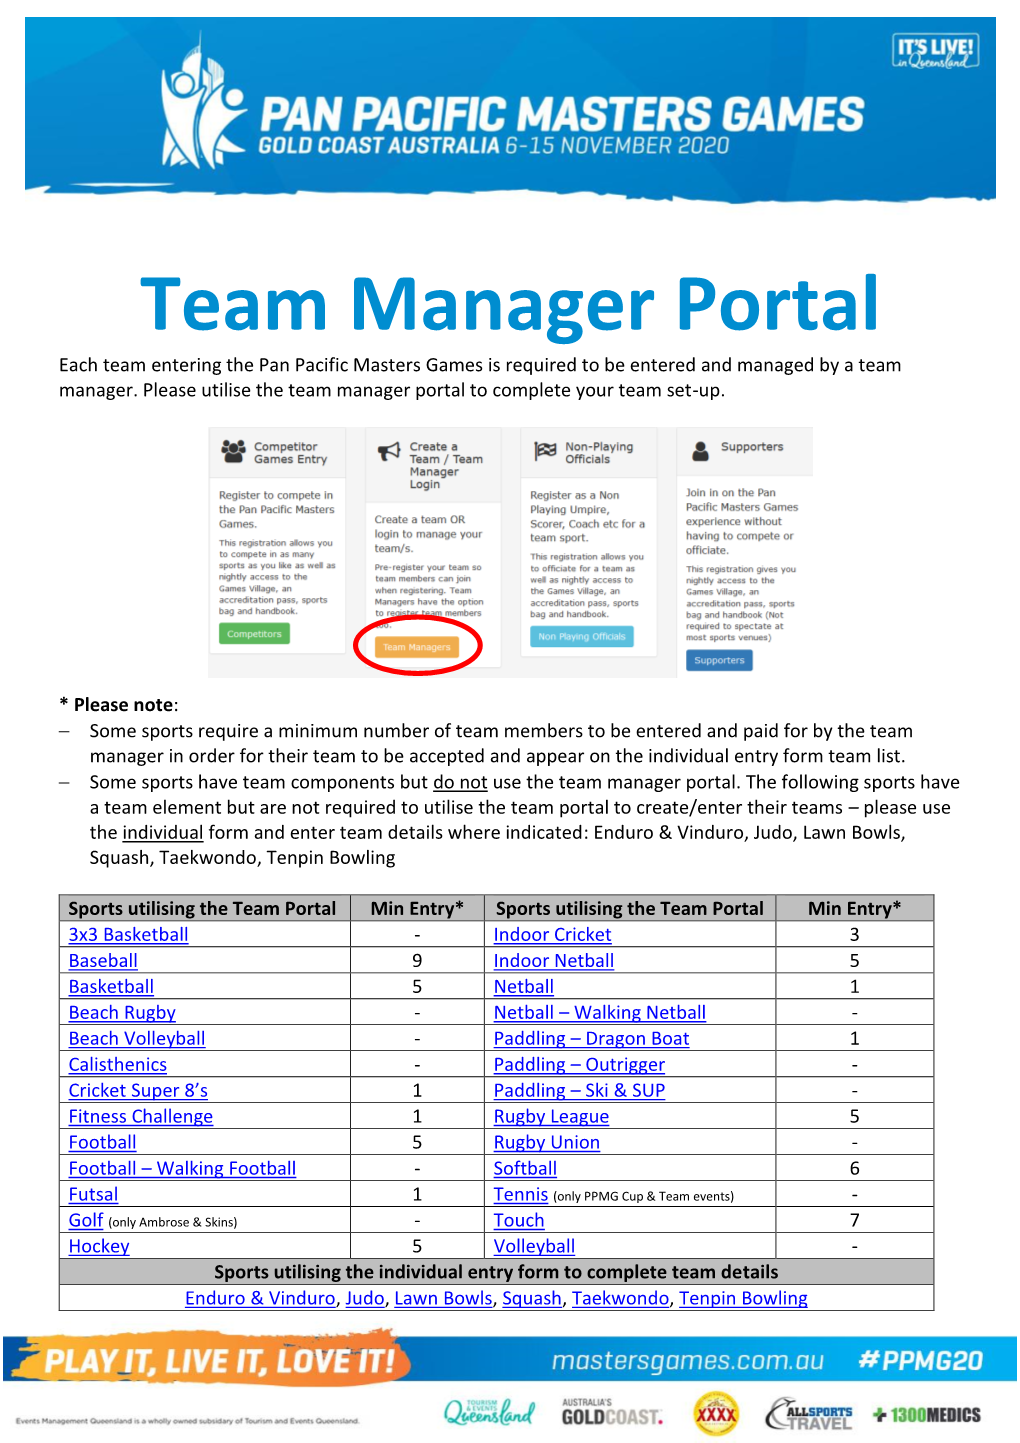 Team Manager Portal Each Team Entering the Pan Pacific Masters Games Is Required to Be Entered and Managed by a Team Manager